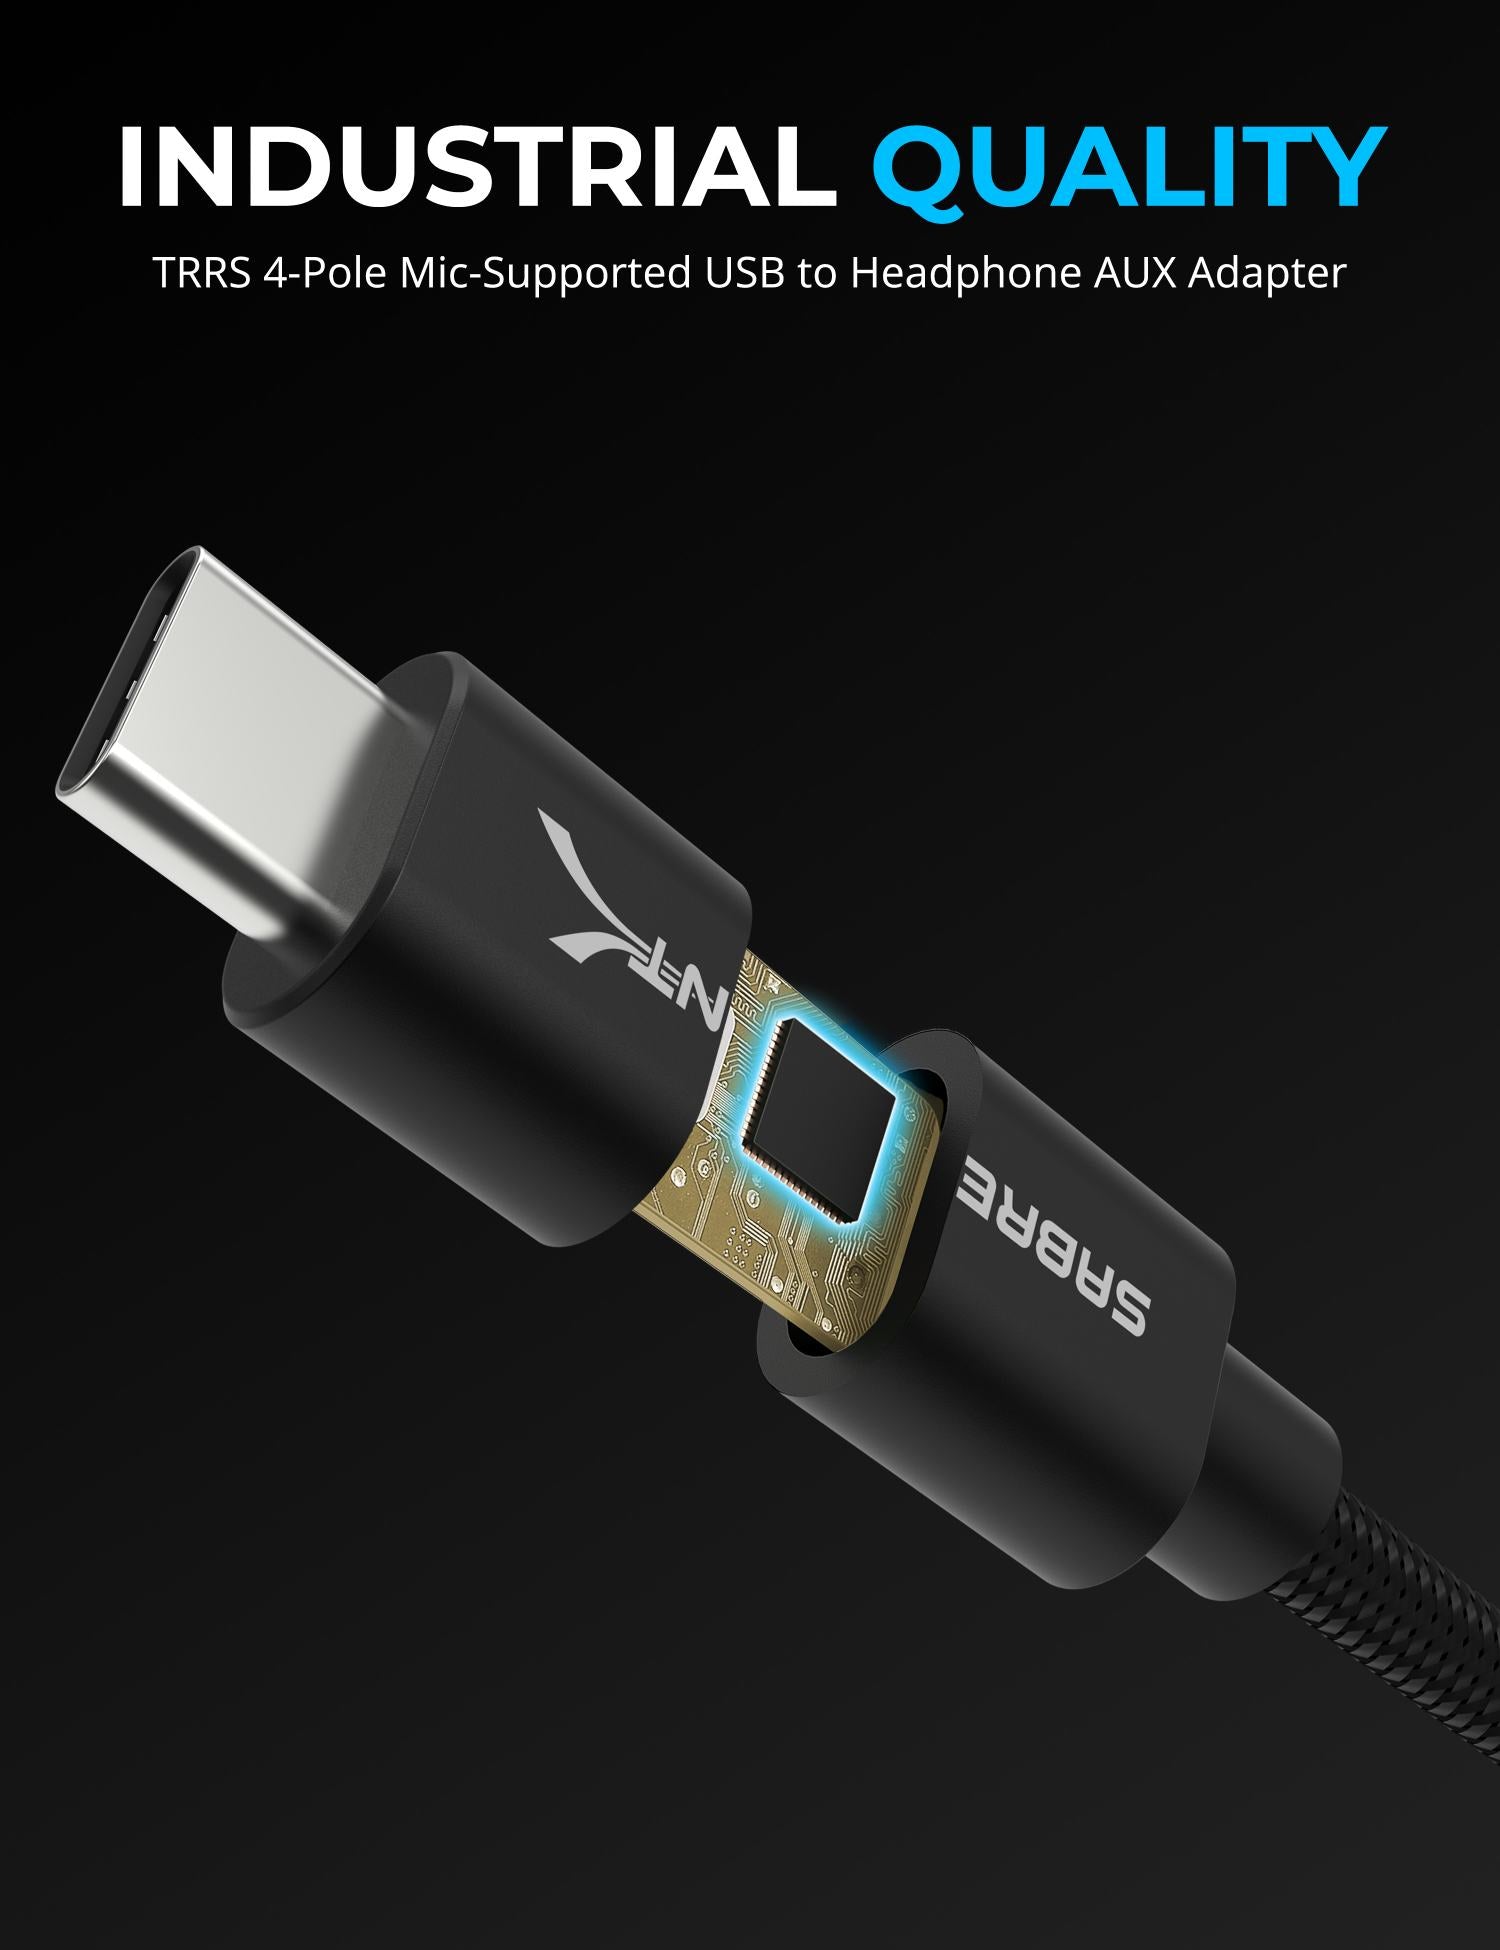 USB Type-C to 3.5mm Audio Jack Adapter 20" Cable - Sabrent